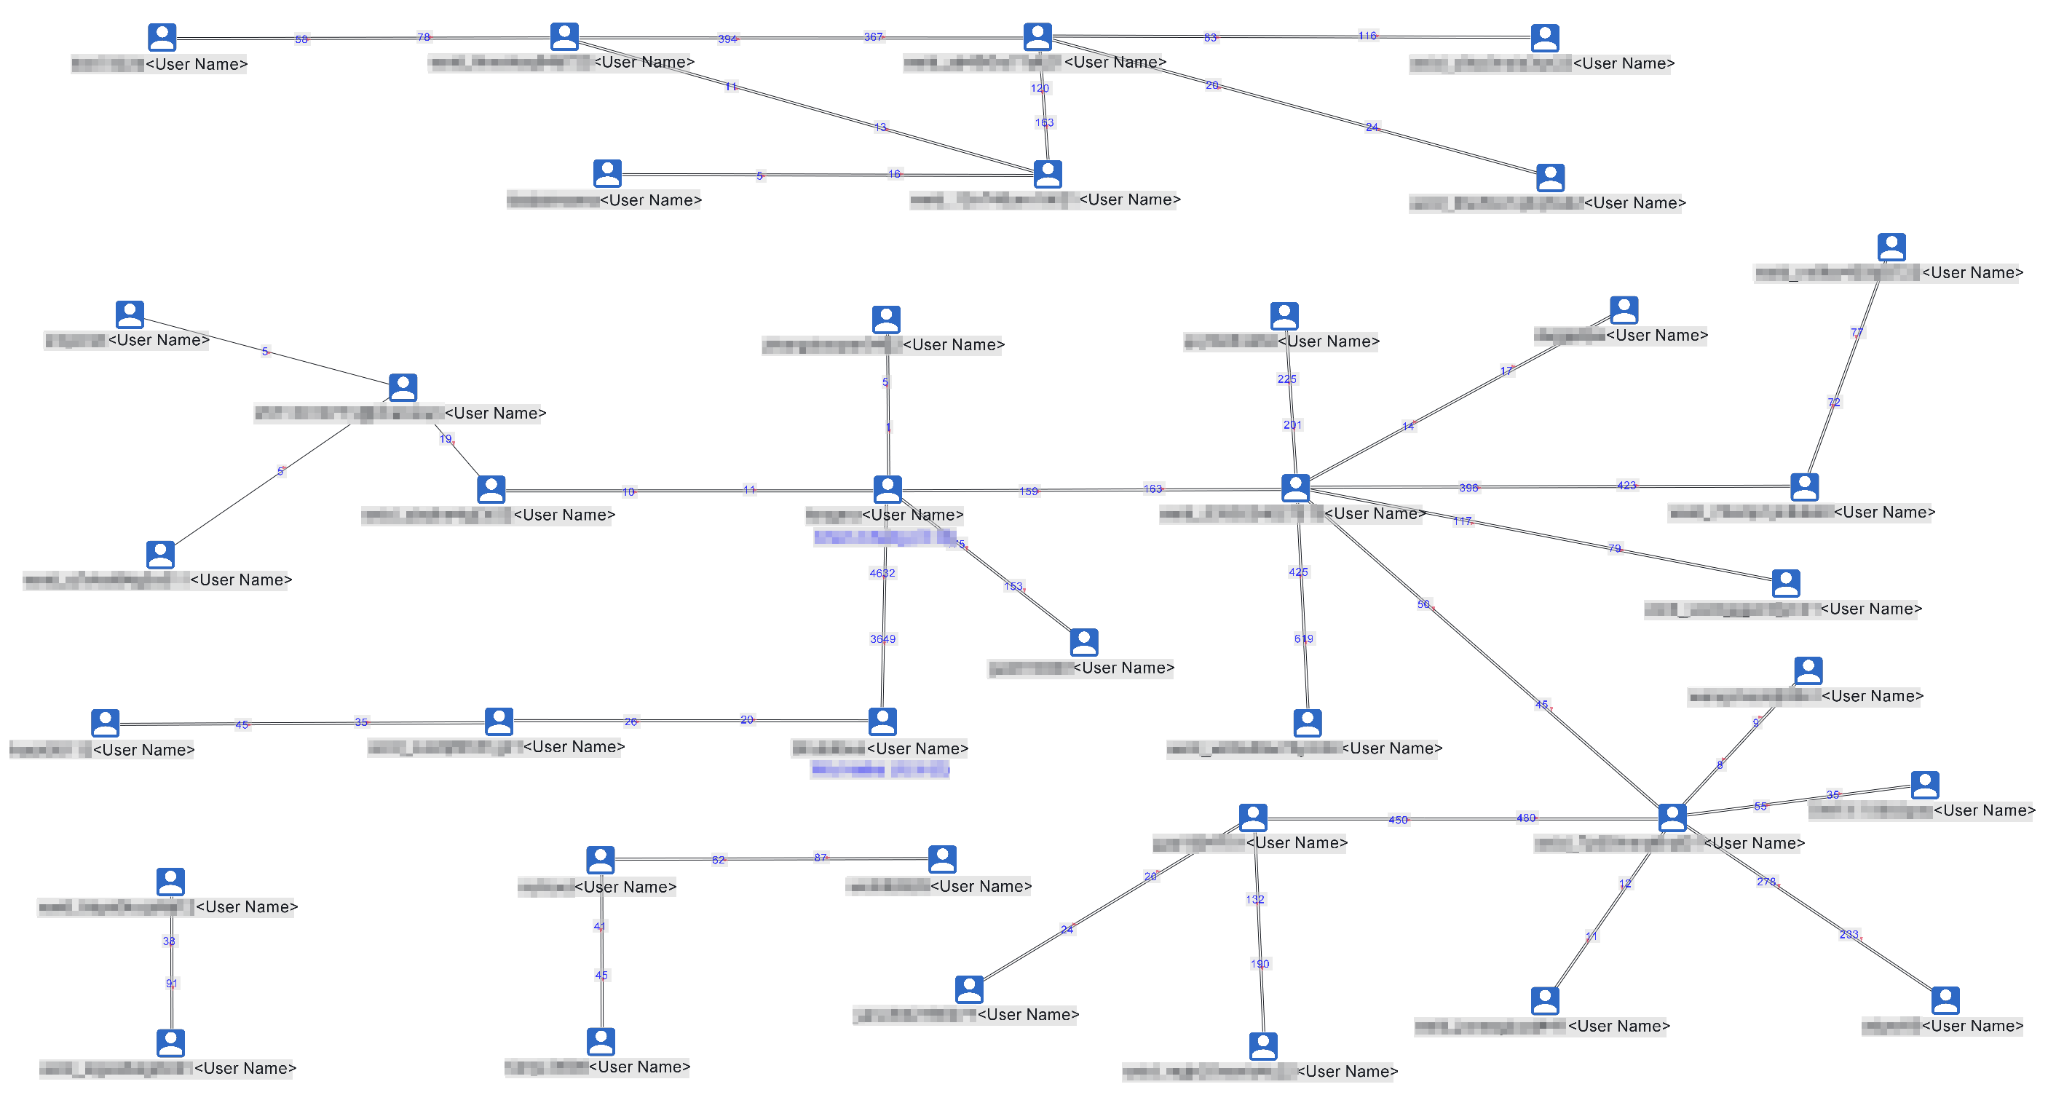 Image 1 is a relationship diagram of employees and message volume. Blue icons represent people with their user names underneath. Arrows connect these users with each other. Numbers along the arrows indicate the number of messages. Usernames have been redacted. 